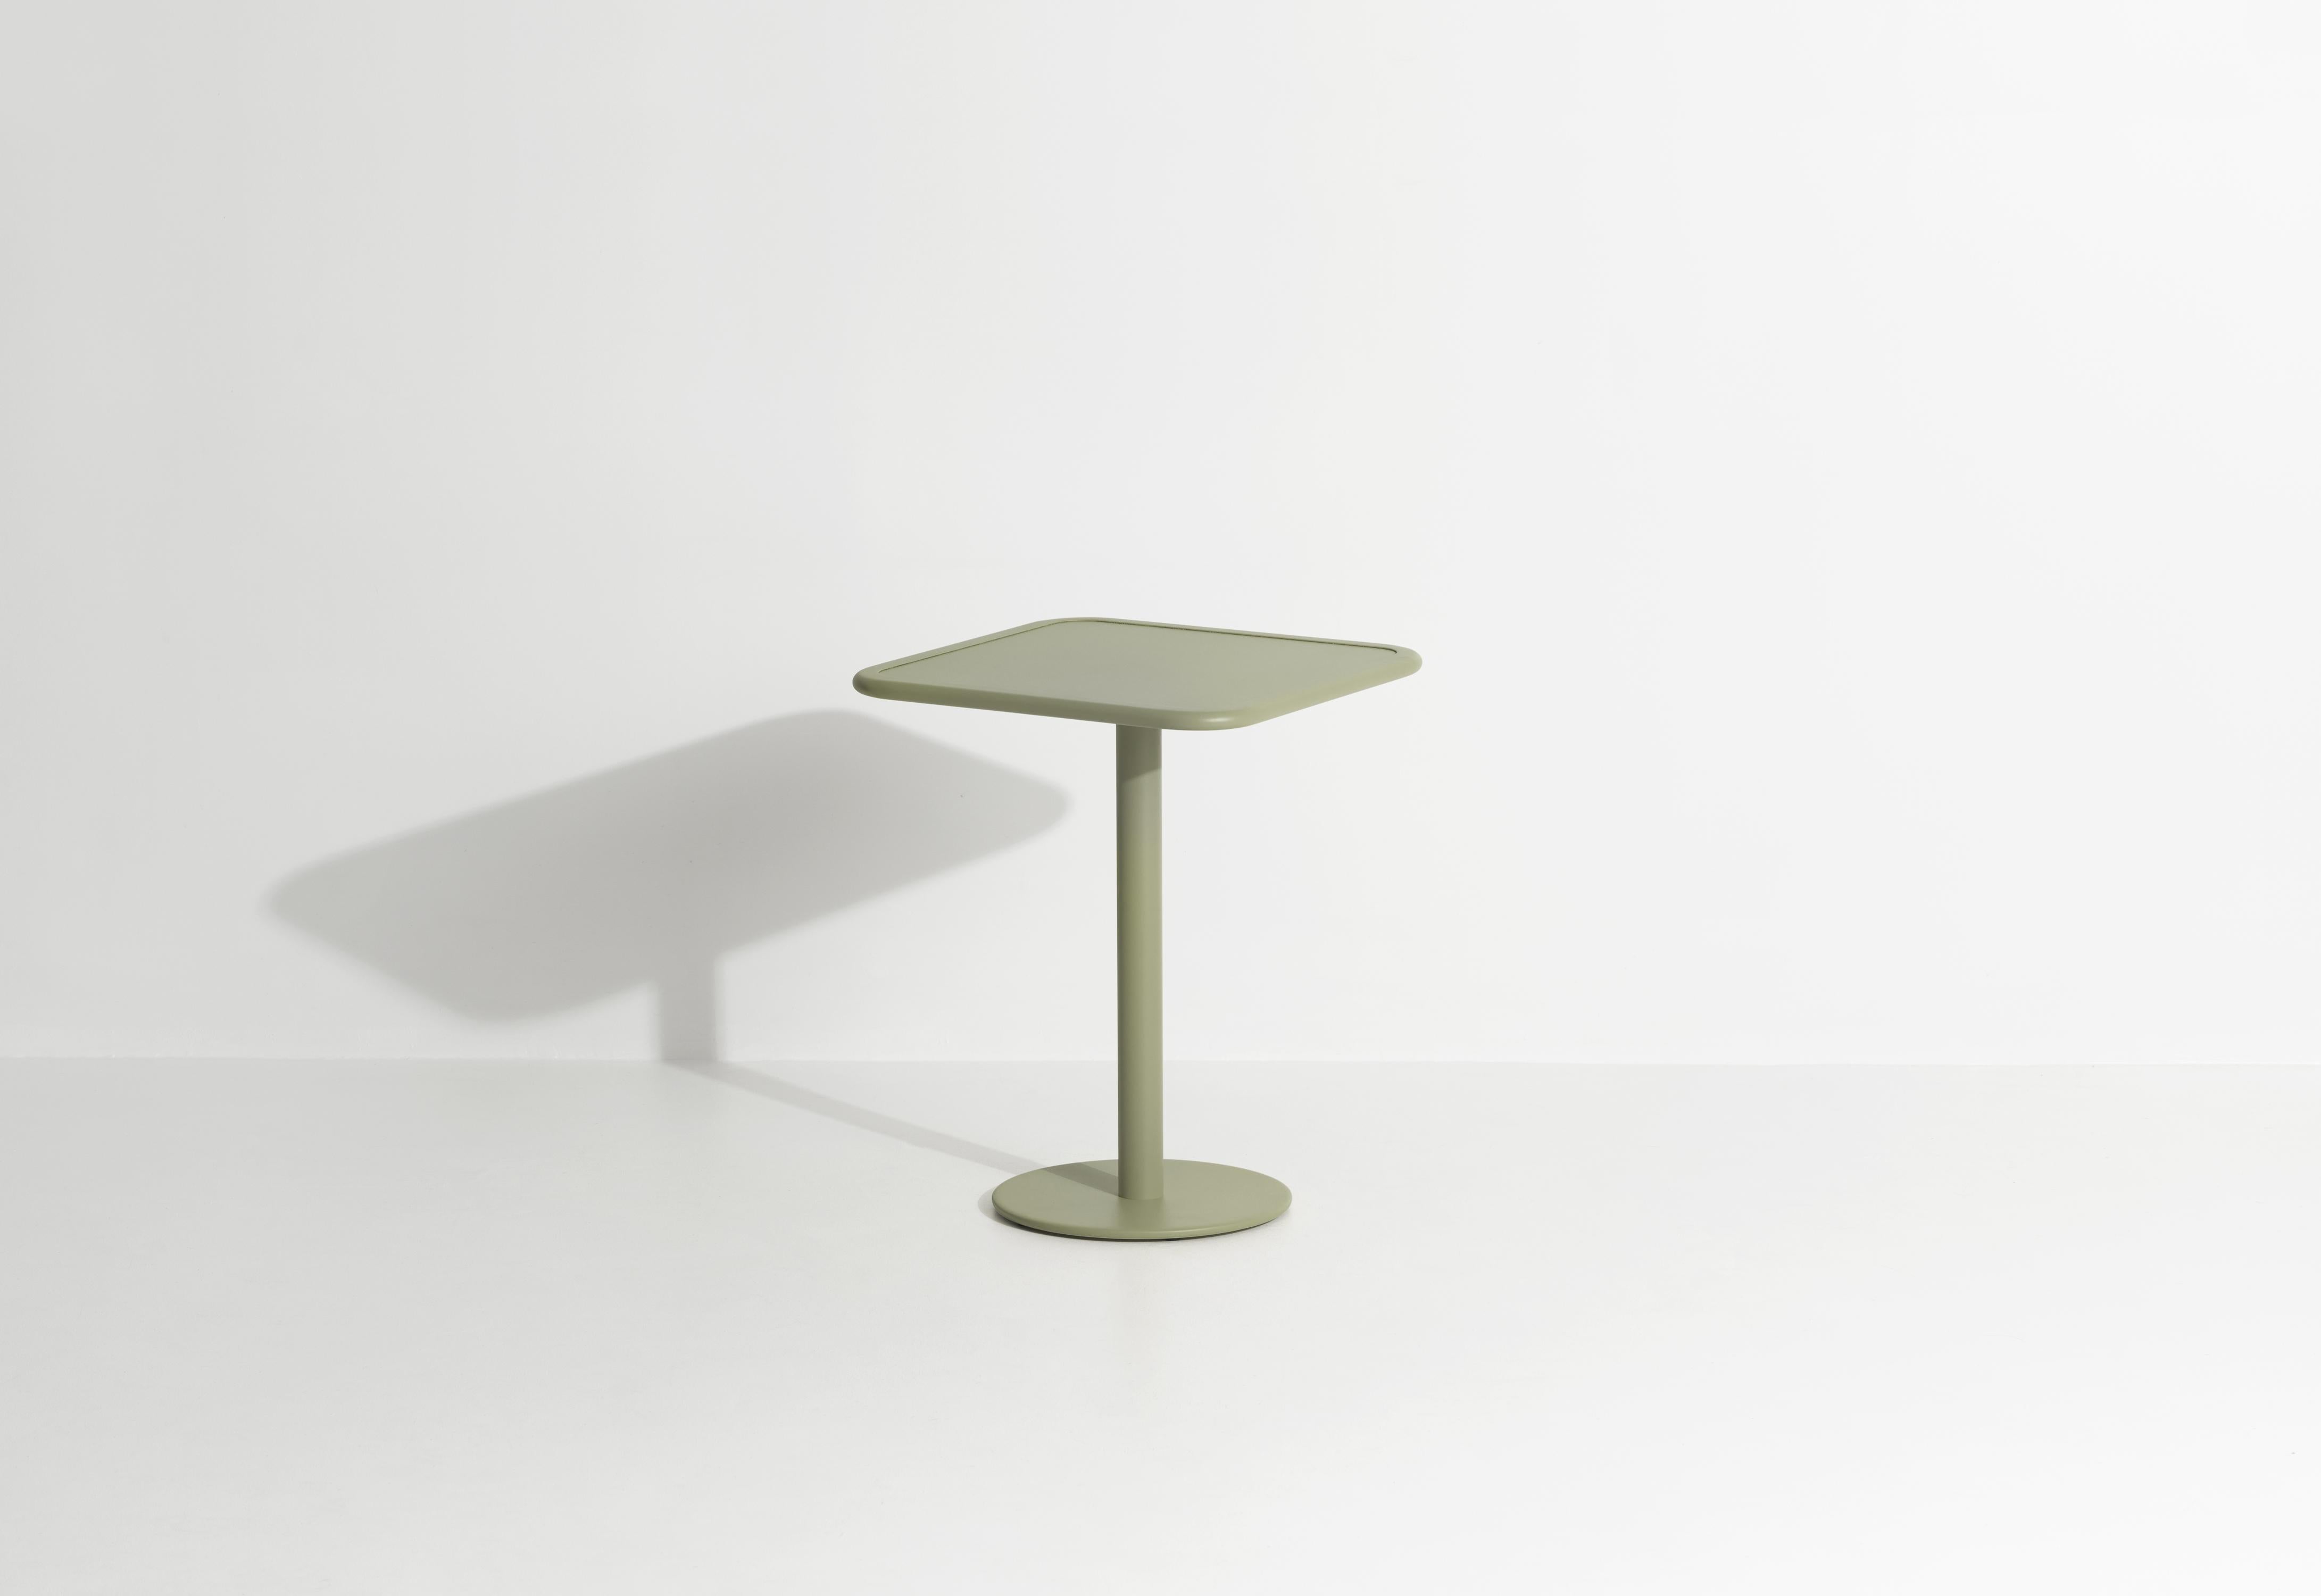 Chinese Petite Friture Week-End Bistro Square Dining Table in Jade Green Aluminium, 2017 For Sale